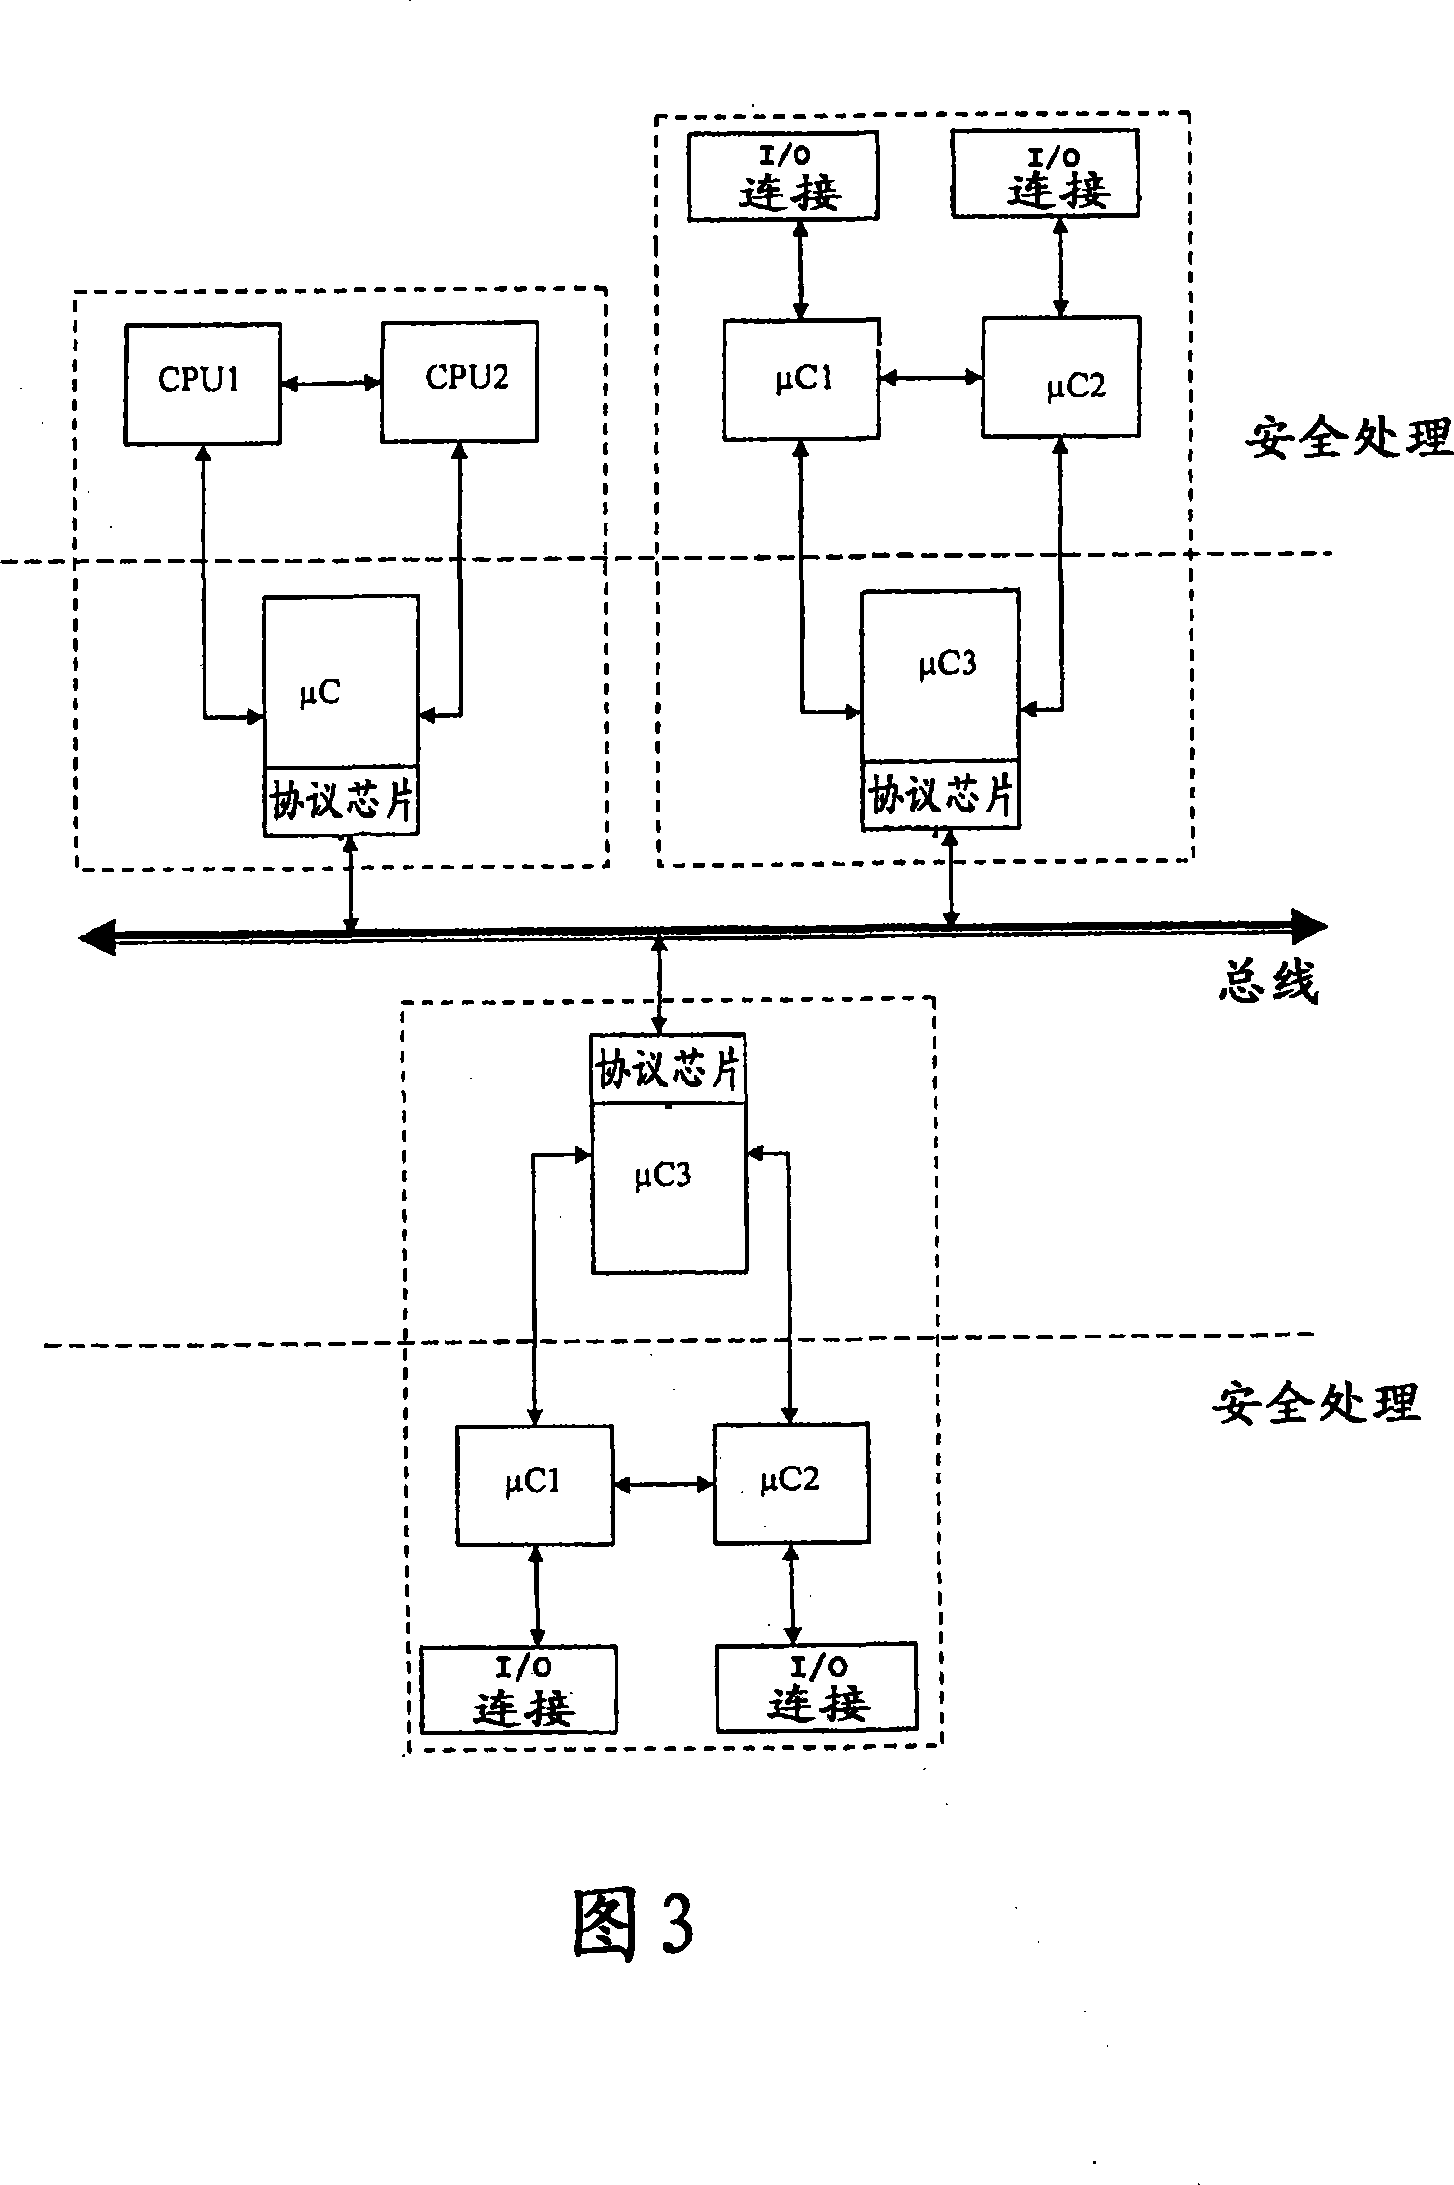 Method and equipment for transferring multi-channel information into single channel safety information